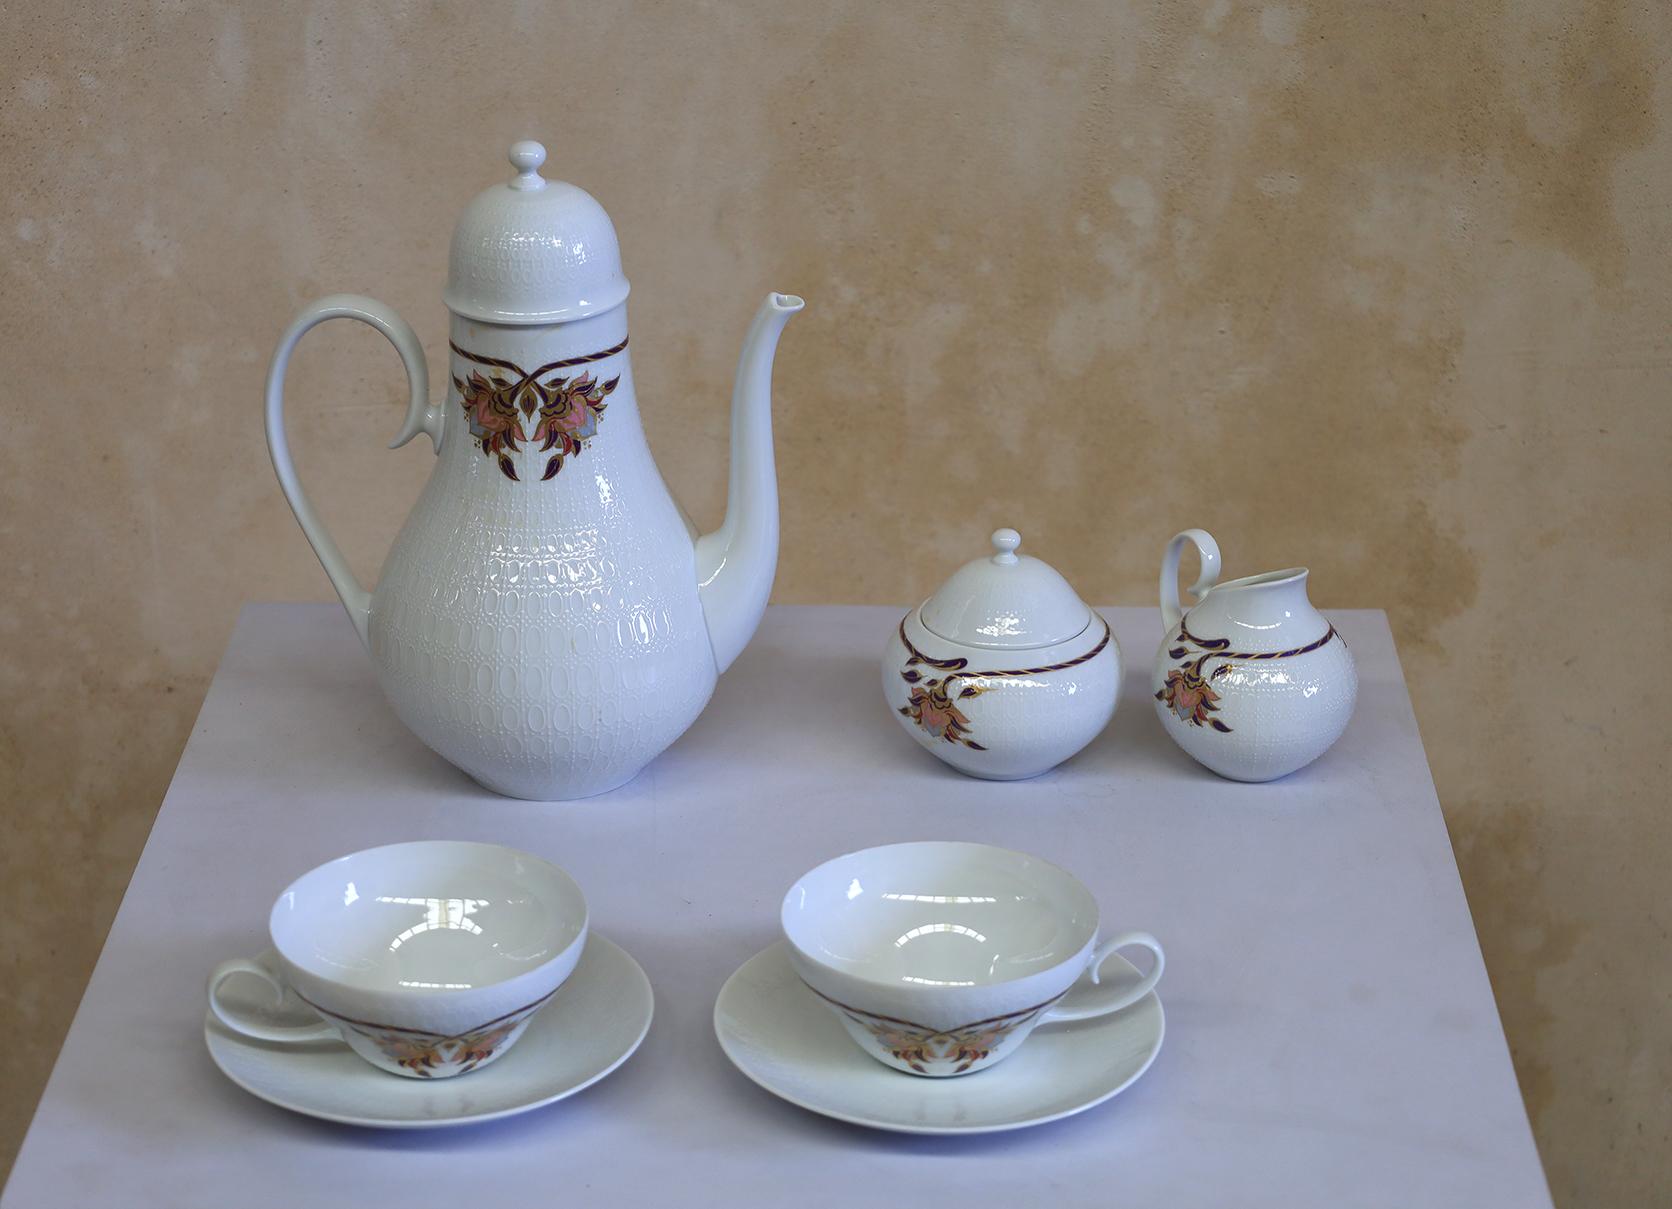 This is a Tea/Coffee Rosenthal Classic Rose set for 11 people. Perfect condition. Never used with original stamps and tags.
Set consist of:

Coffee Pot 27 cms H x 16 cms D
Sugar bowl 12 cms D x 10 cms H
Cream bowl 10 cms D x 10 cms H
Cup 6 cms